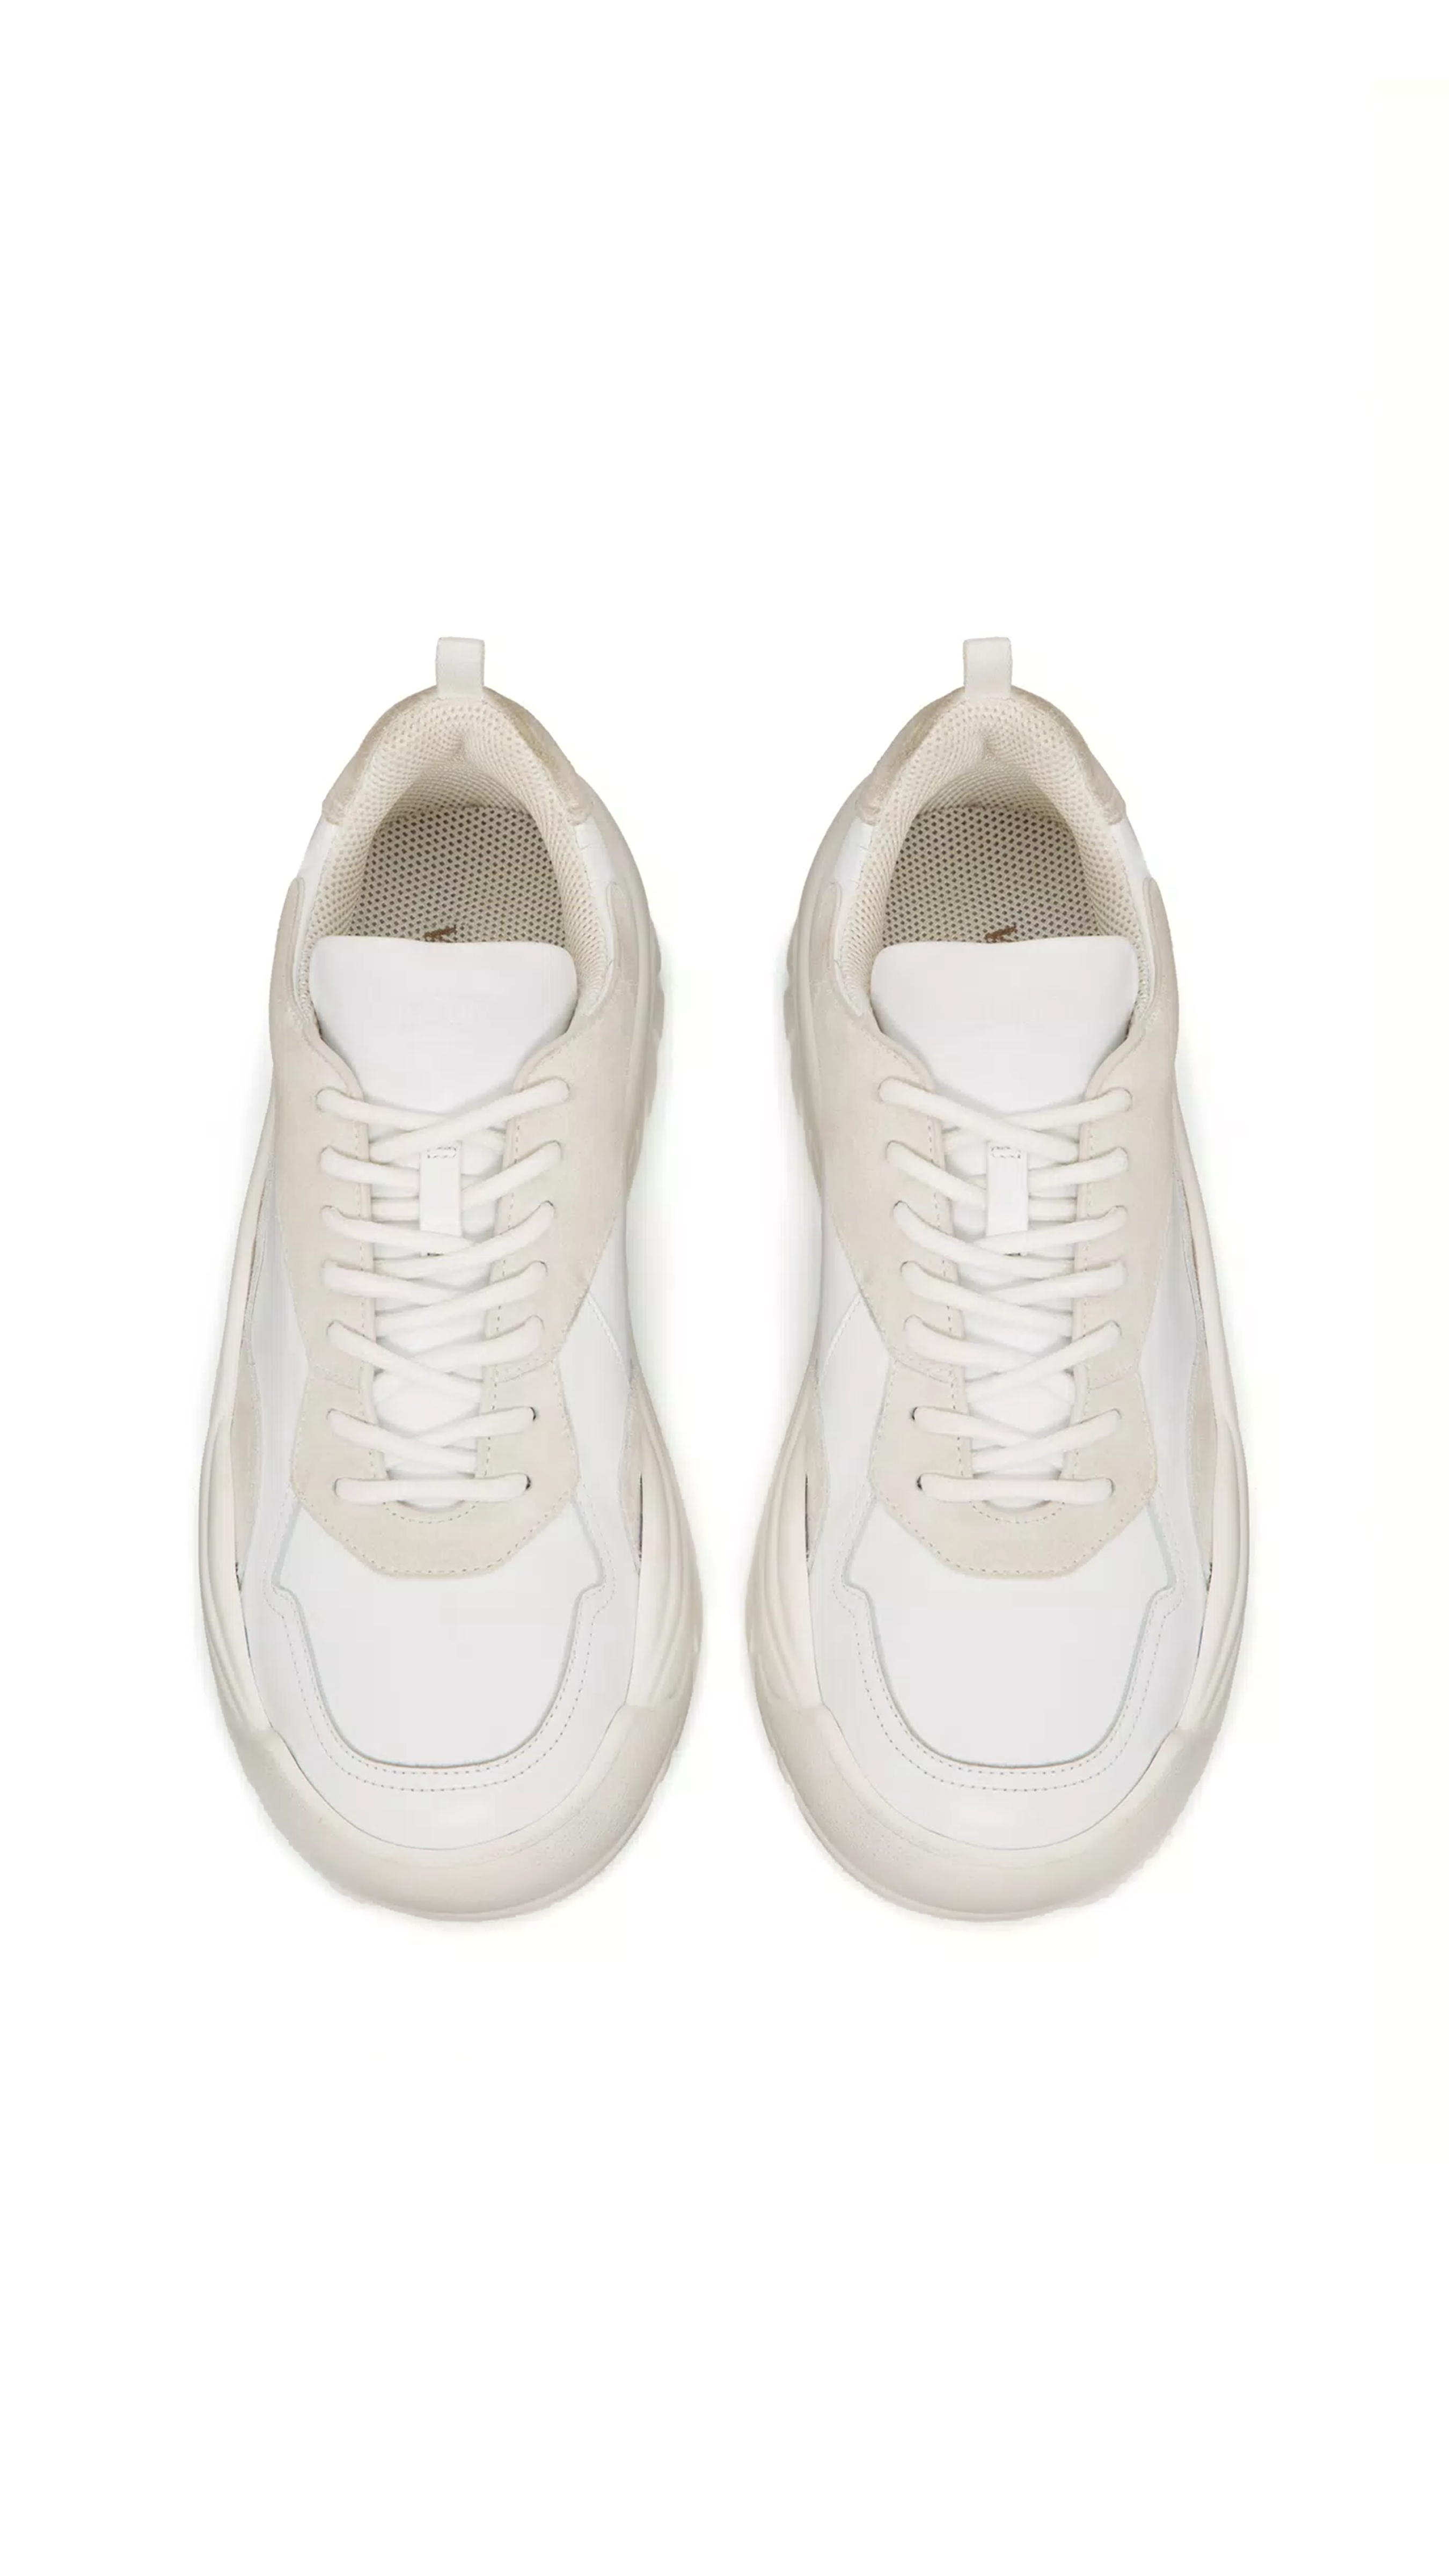 Gumboy Calfskin and Suede Sneakers - White